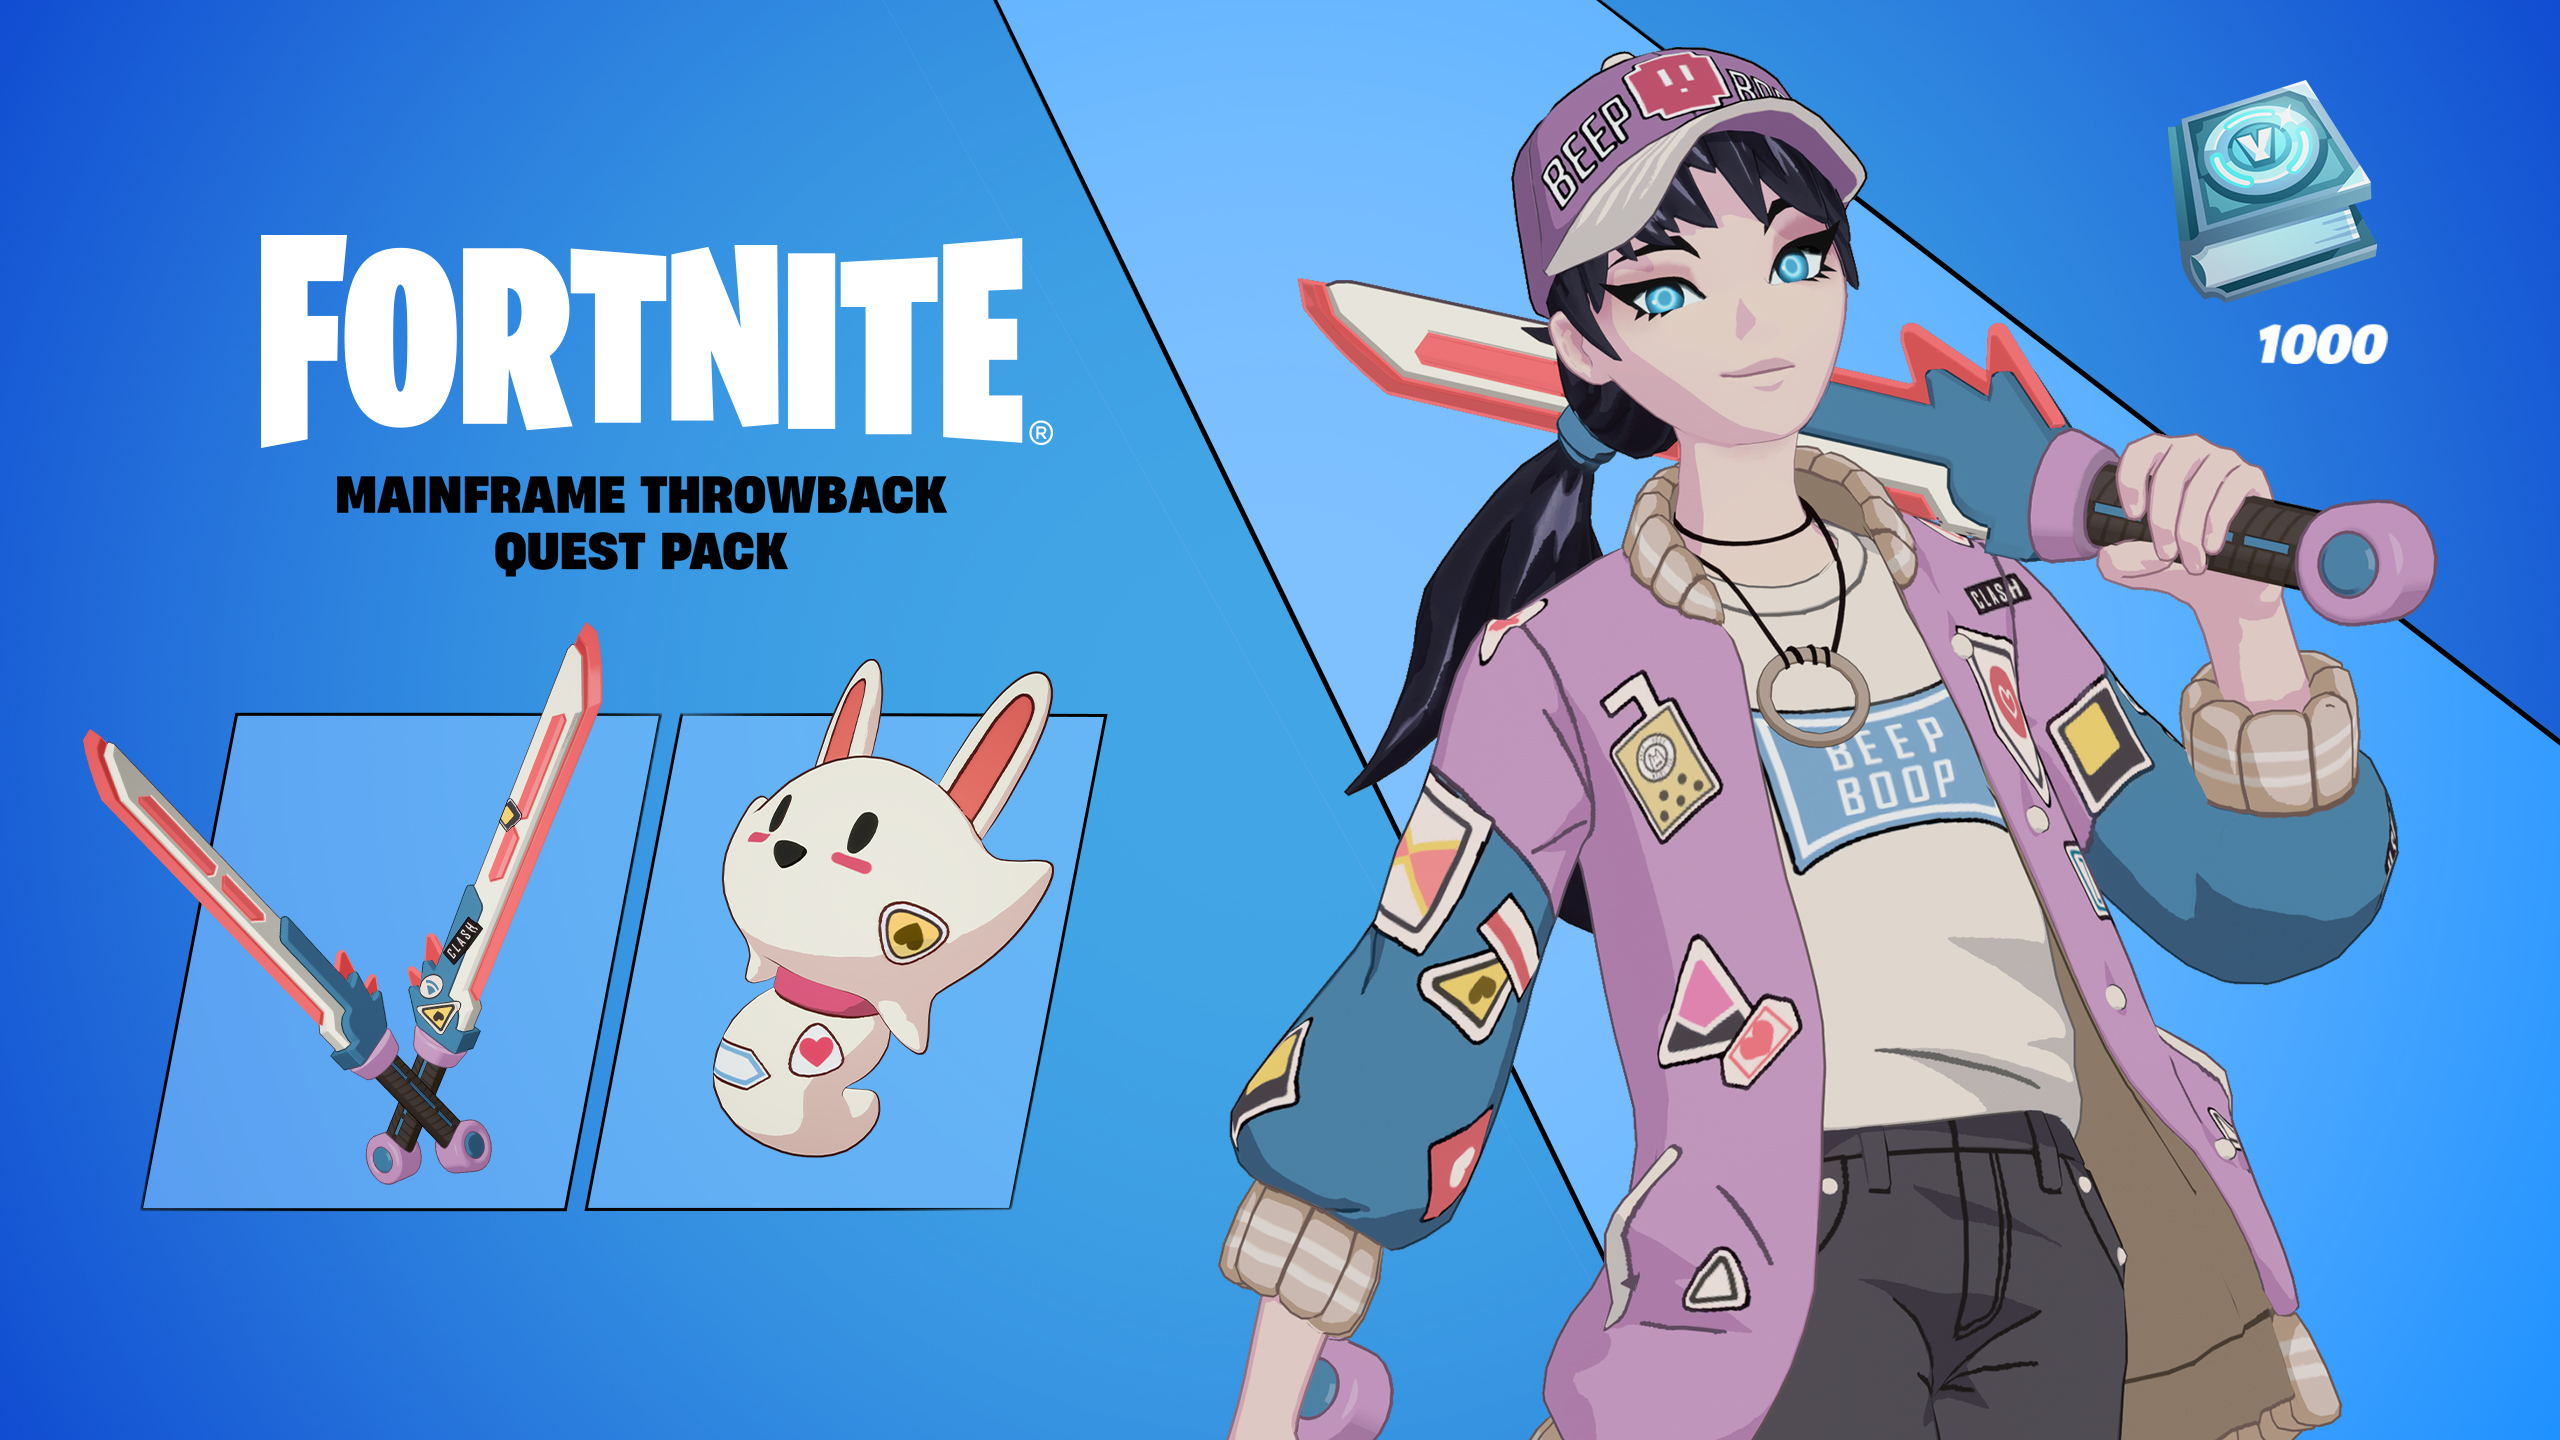 Fortnite - Mainframe Throwback Quest Pack DLC TR XBOX One / Xbox Series X|S CD Key 18.07 USD